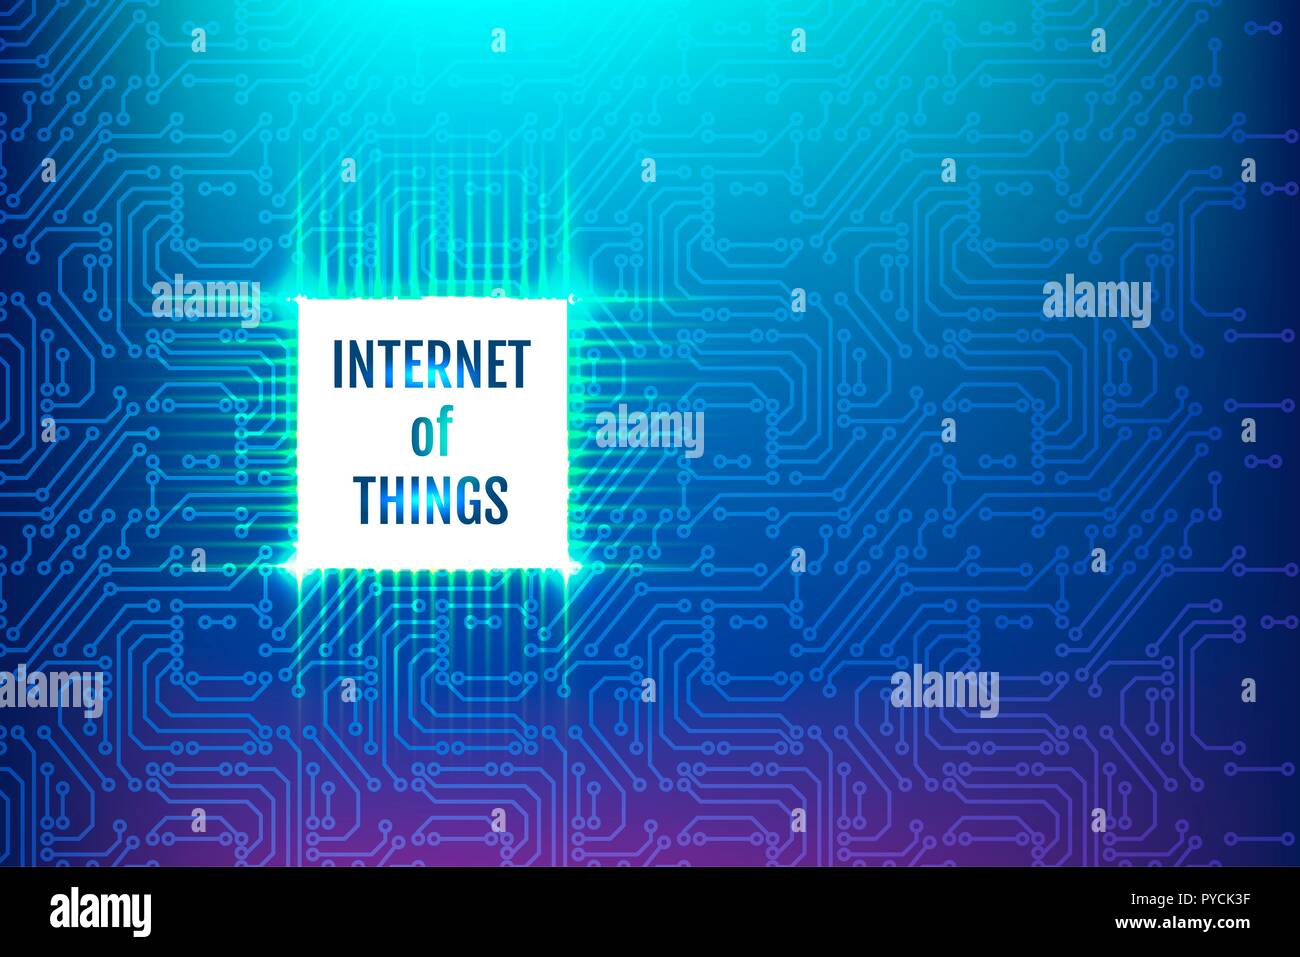 Internet of things, conceptual illustration. Stock Photo